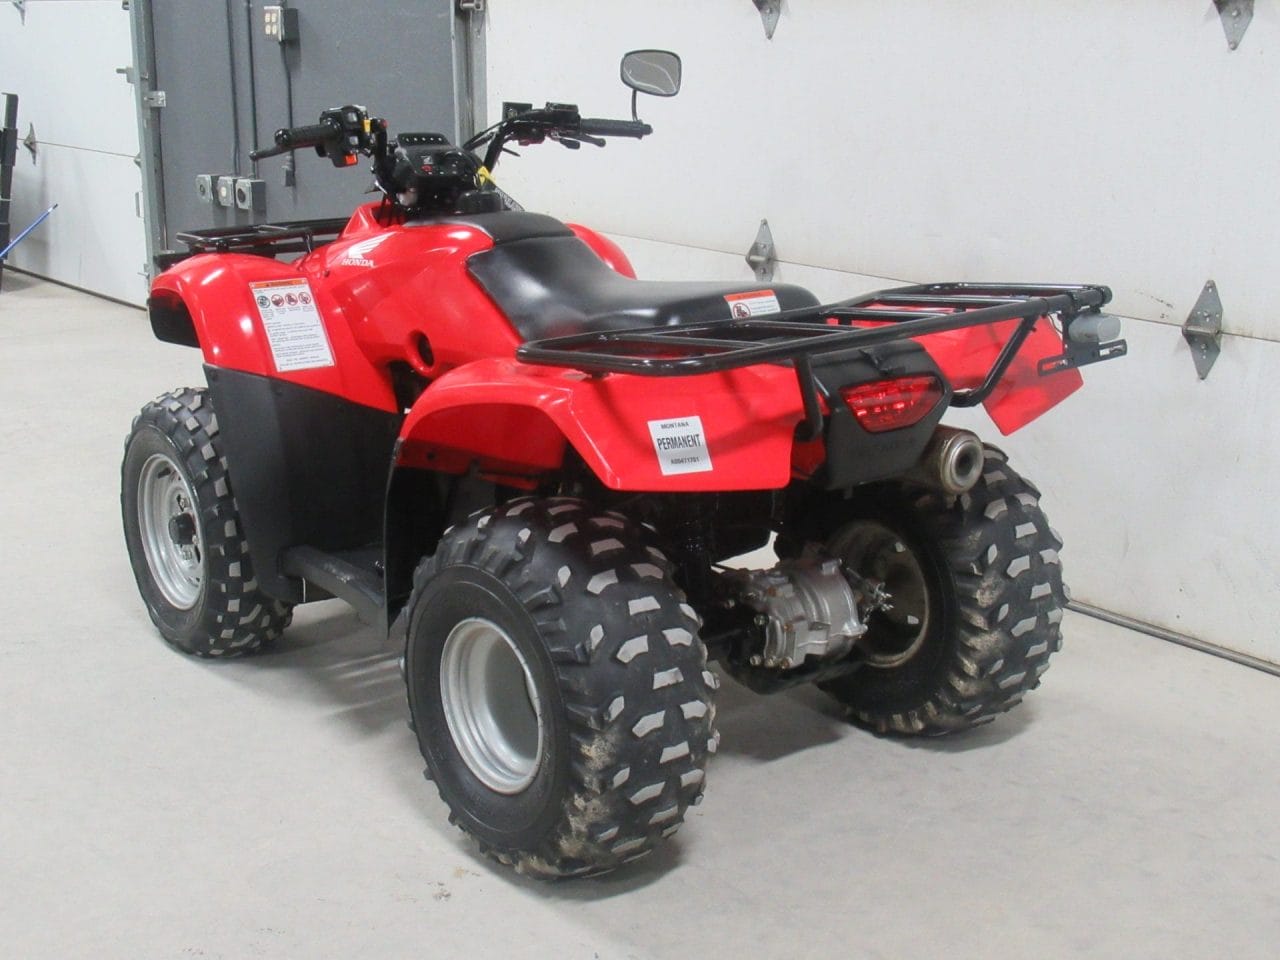 2007 Honda Recon 250 2wd * Great Condition * Street Legal * 